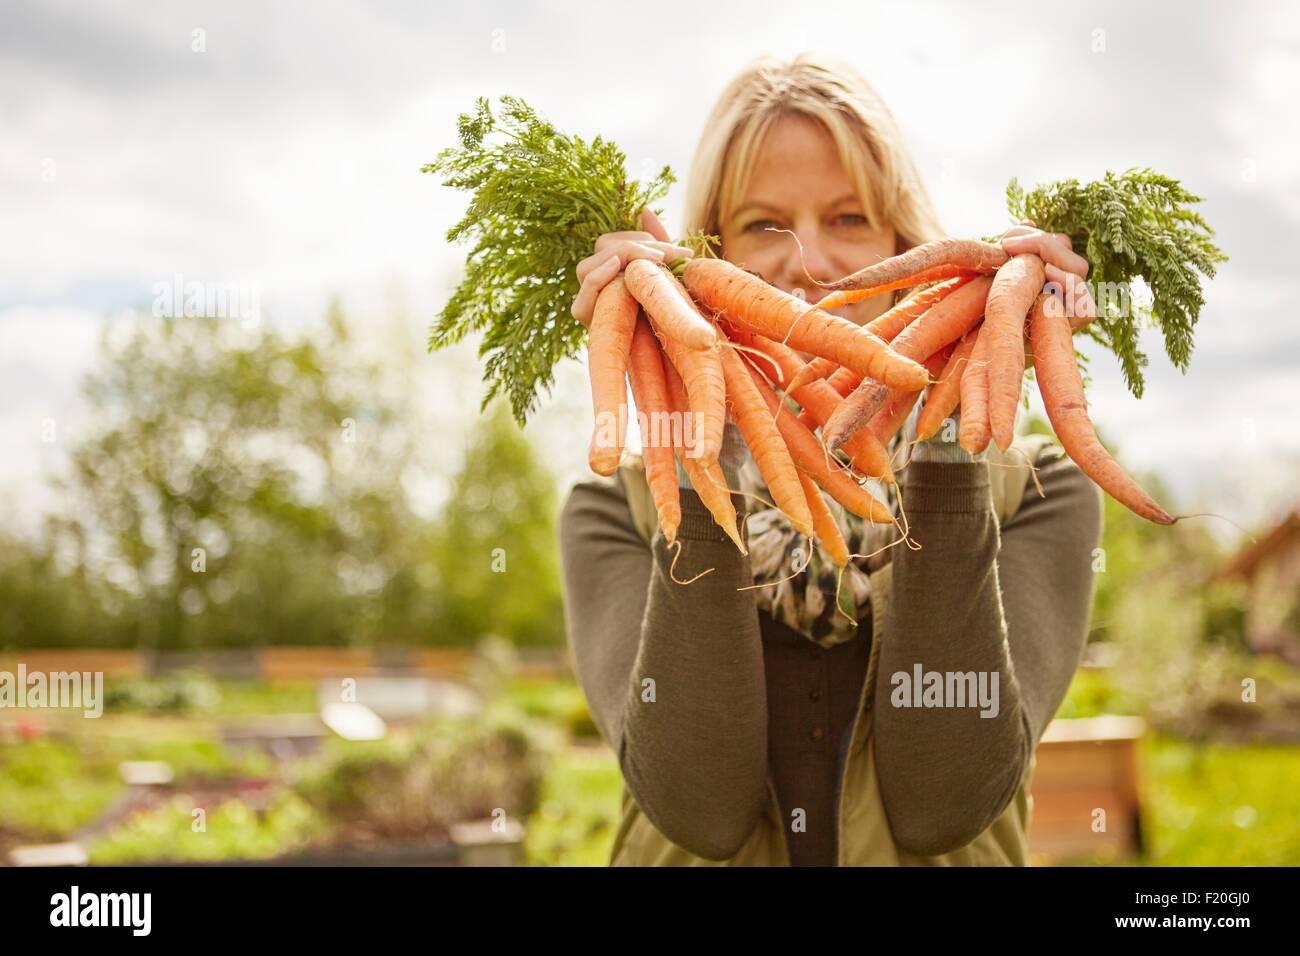 Portrait of mature woman, outdoors, holding two bunches of carrots Stock Photo